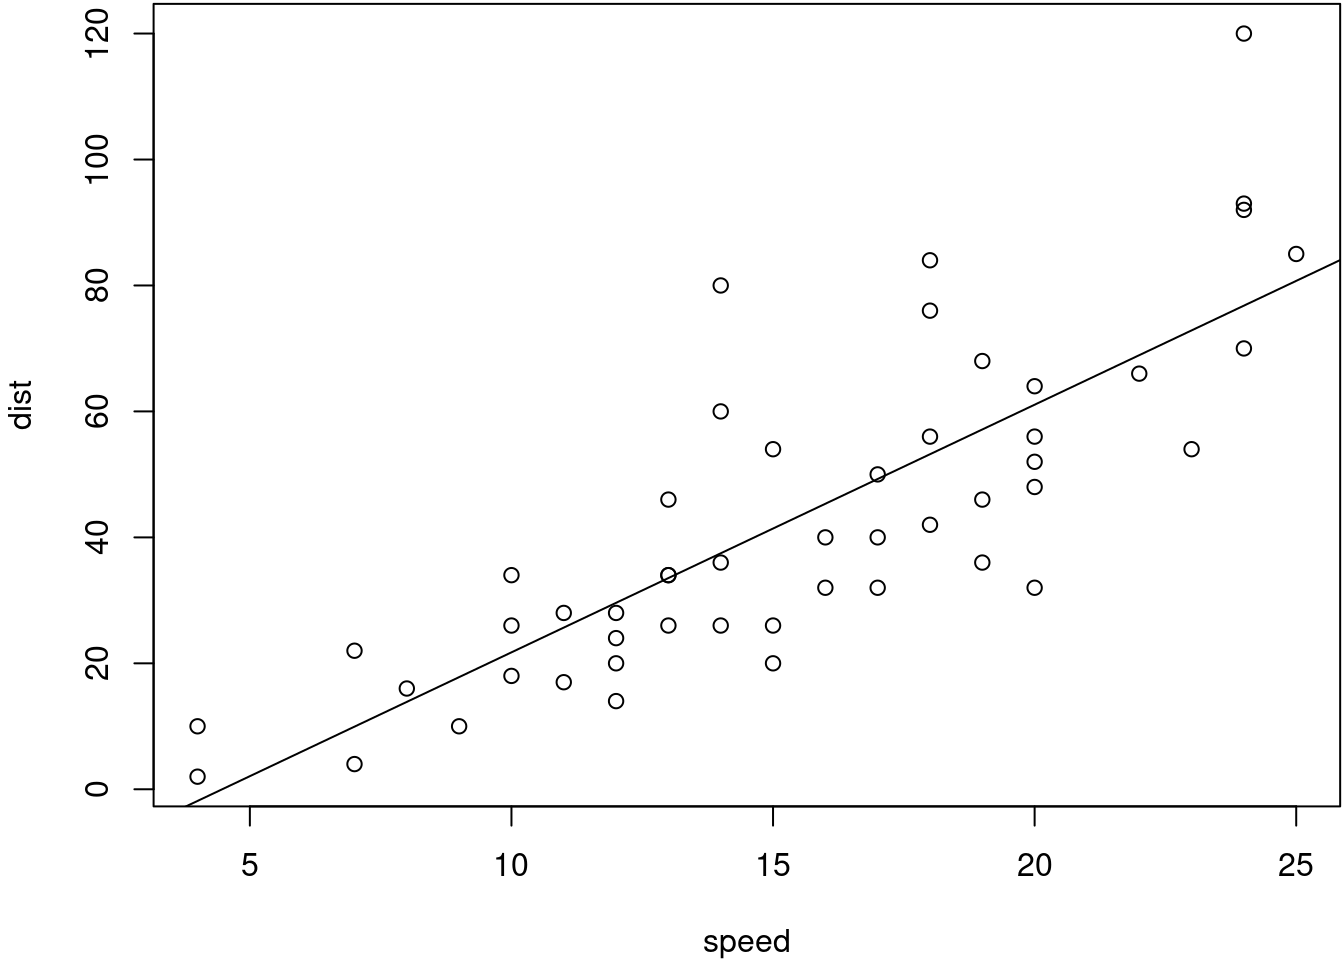 Adding a regression line to an existing scatterplot.